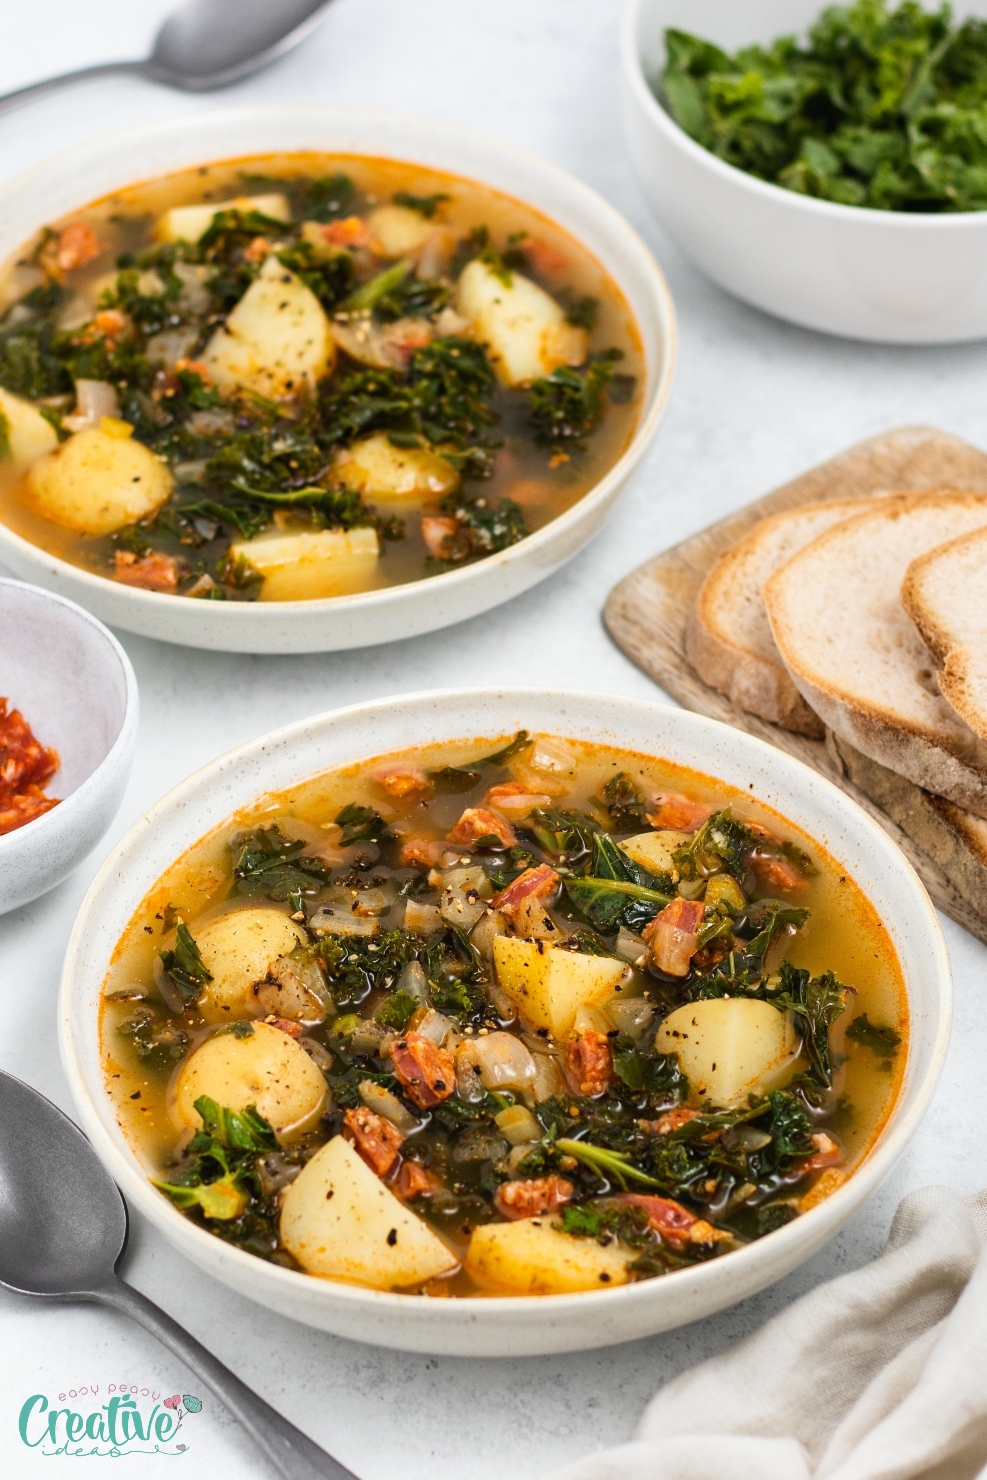 Two bowls of kale soup with chorizo featuring chunks of potatoes and fresh kale leaves, served piping hot.